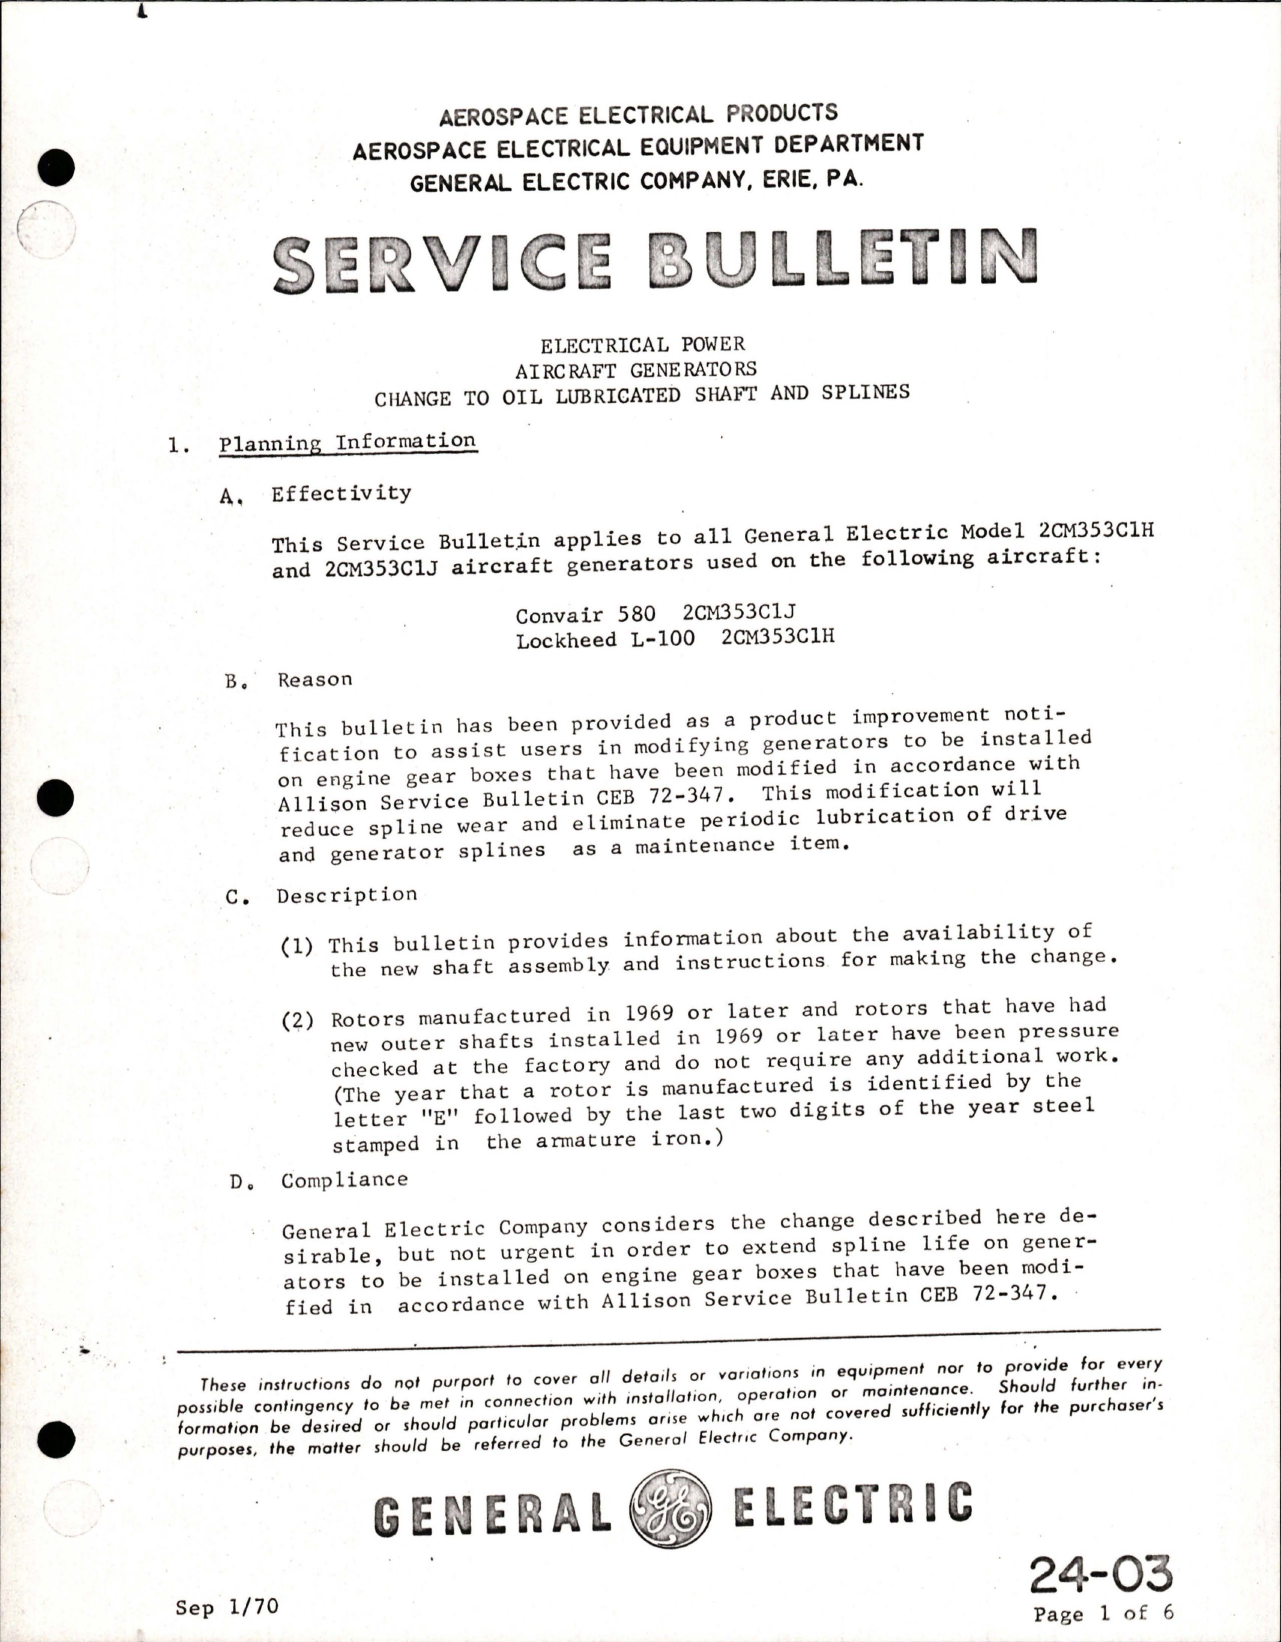 Sample page 1 from AirCorps Library document: Change to Oil Lubricated Shaft and Splines on Electrical Power Aircraft Generators 